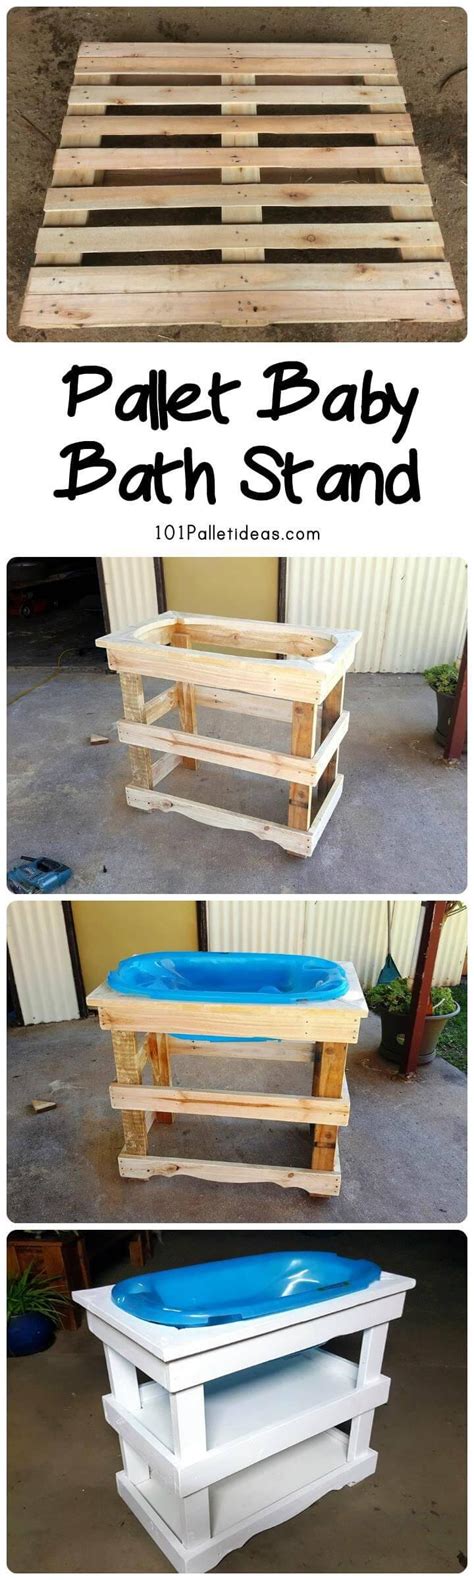 pallet baby baath stand diy easy pallet ideas